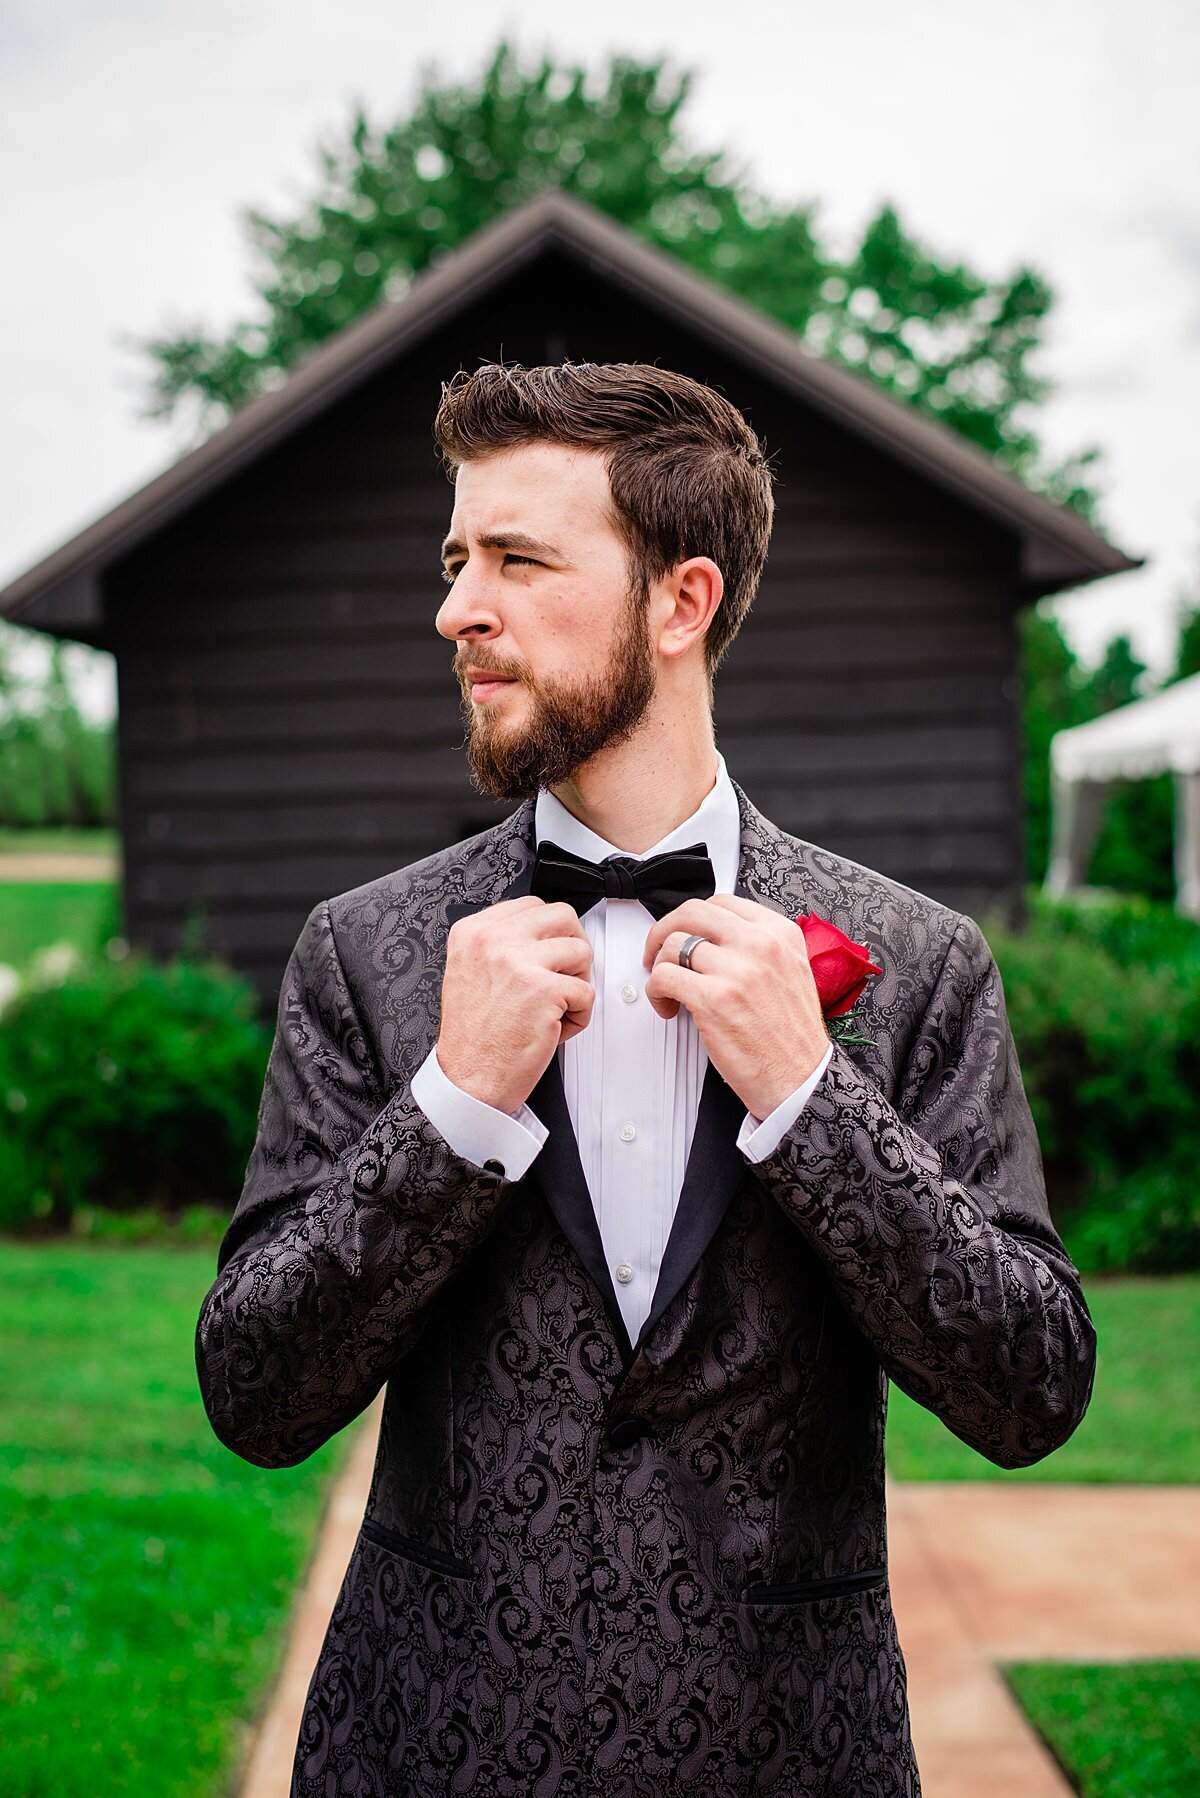 The groom, wearing a black silk tuxedo with an embroidered paisley pattern and red rose boutonniere adjusts his black bowtie as he stands in front of a rustic barn wood cabin at Arrington Vineyards.